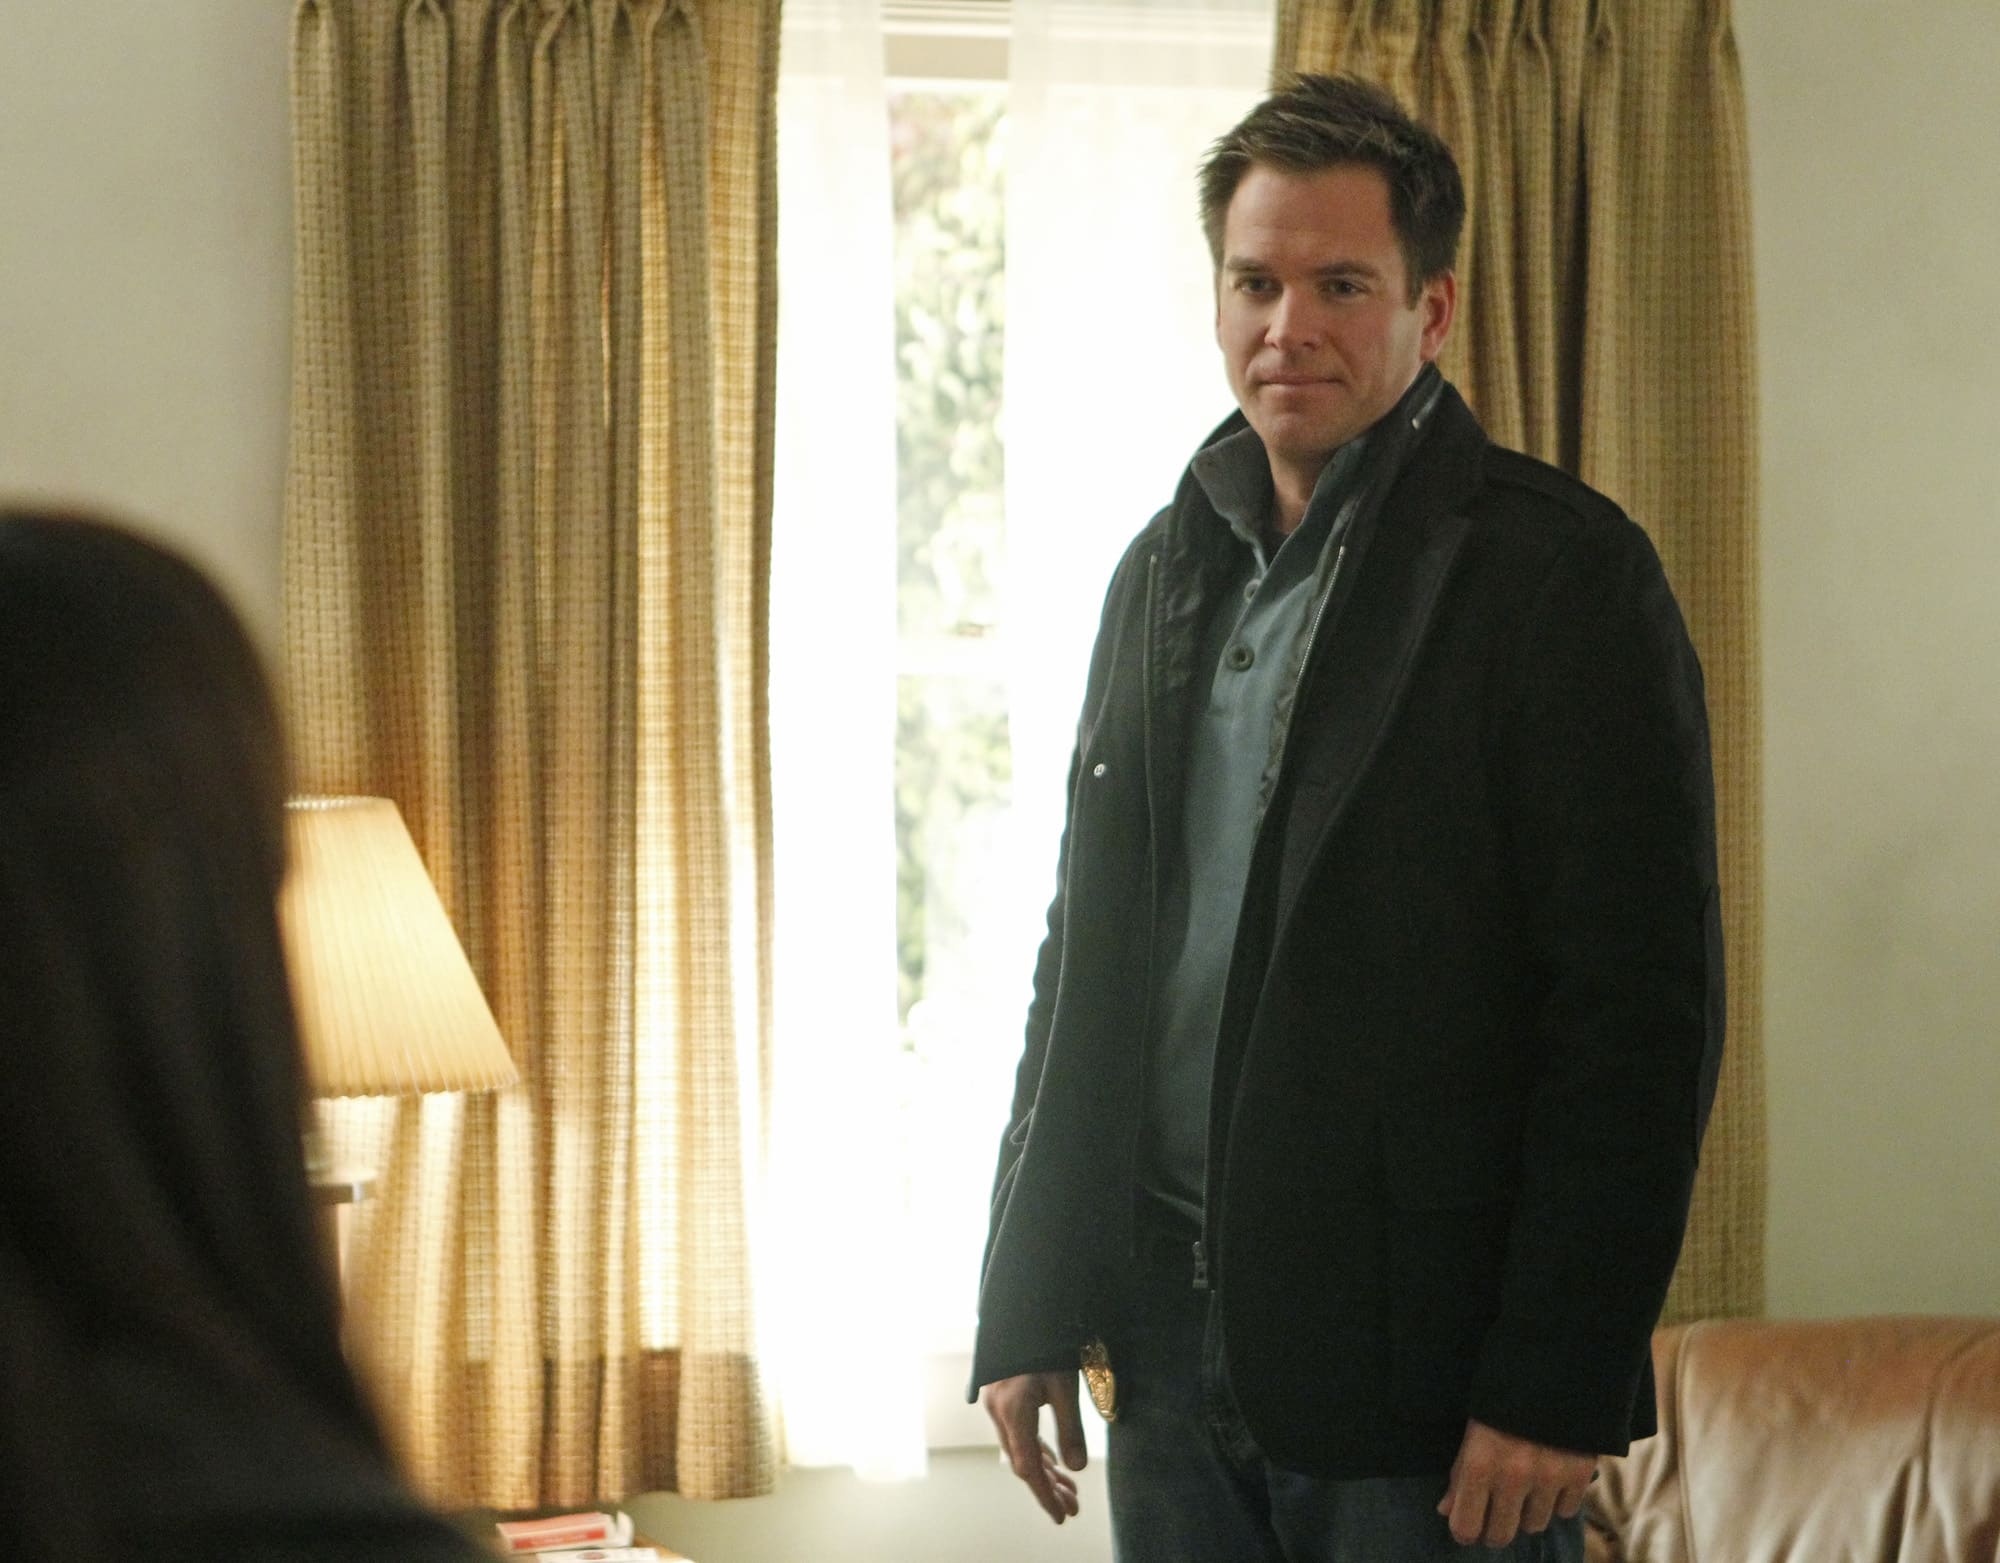 Pictured: Michael Weatherly as NCIS Special Agent Anthony DiNozzo Photo: Sonja Flemming/CBS 2011 CBS Broadcasting Inc. All Rights Reserved.